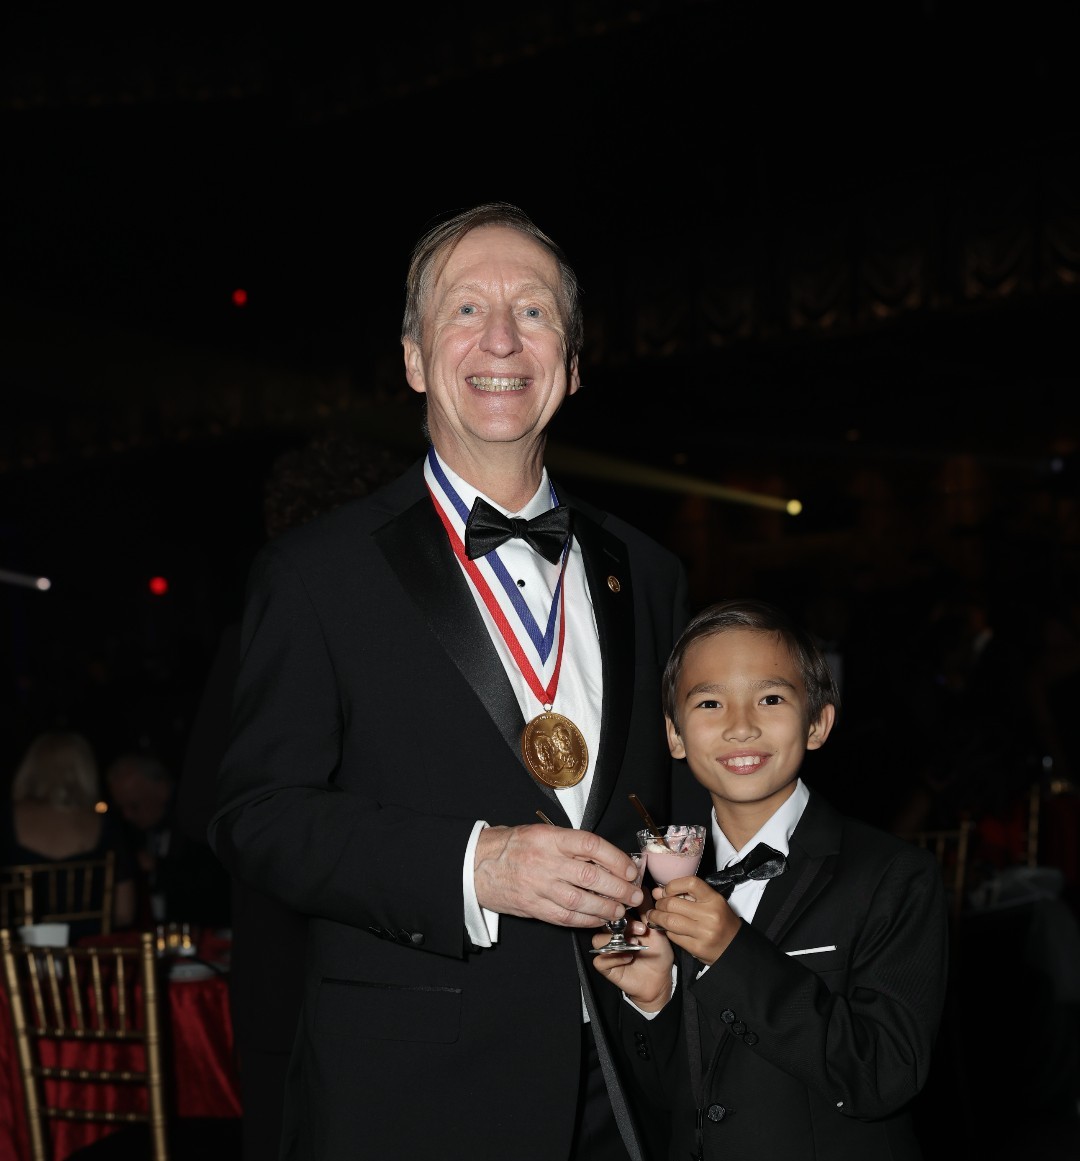 Last night @TheAnthemDC was filled with the spirit of innovation as we welcomed our Class of 2024 Inductees. Check out some of the standout moments from an unforgettable night! #NIHF2024